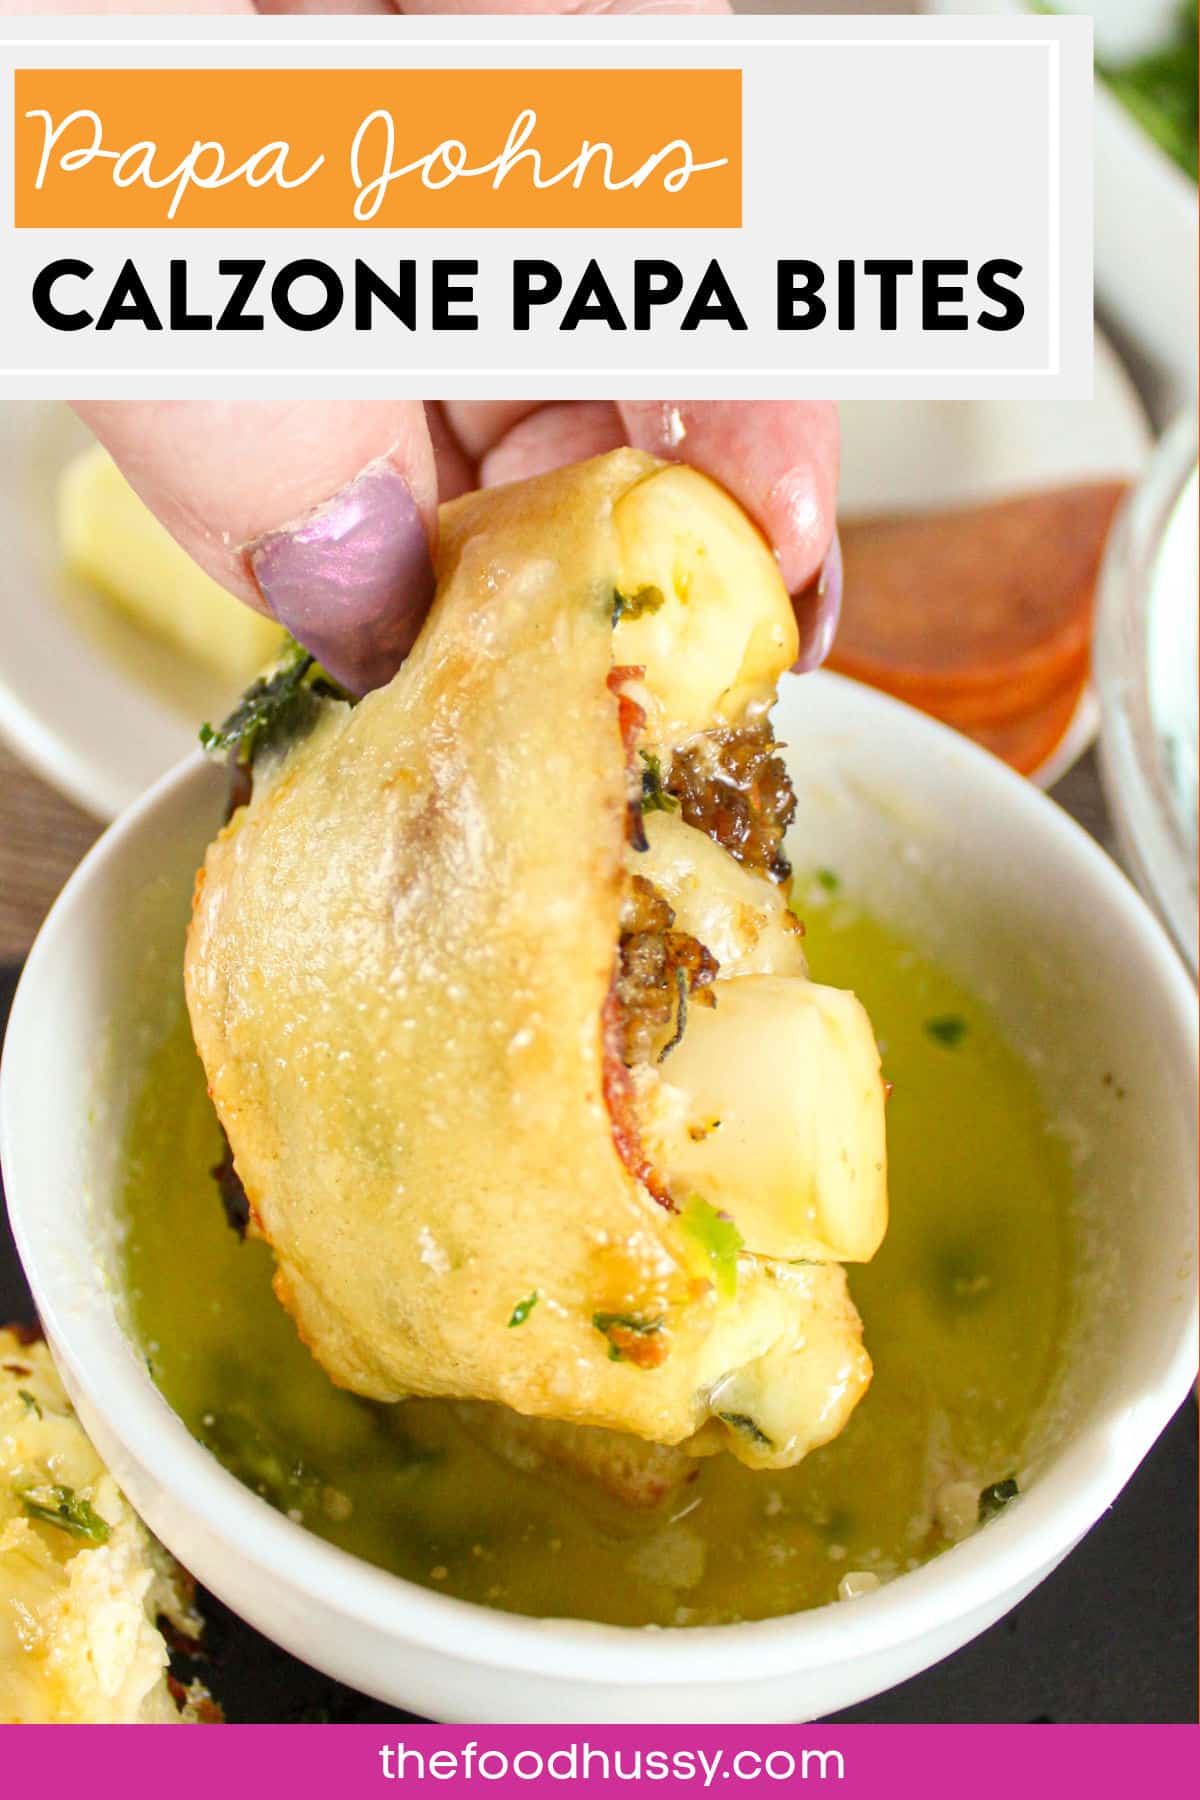 Papa John's is back at it again - this time with this menu item: New Calzone Papa Bites! Pizza crust stuffed full with crave-worthy flavors like mozzarella cheese, garlic herb ricotta, pepperoni, sausage and green pepper!  via @foodhussy